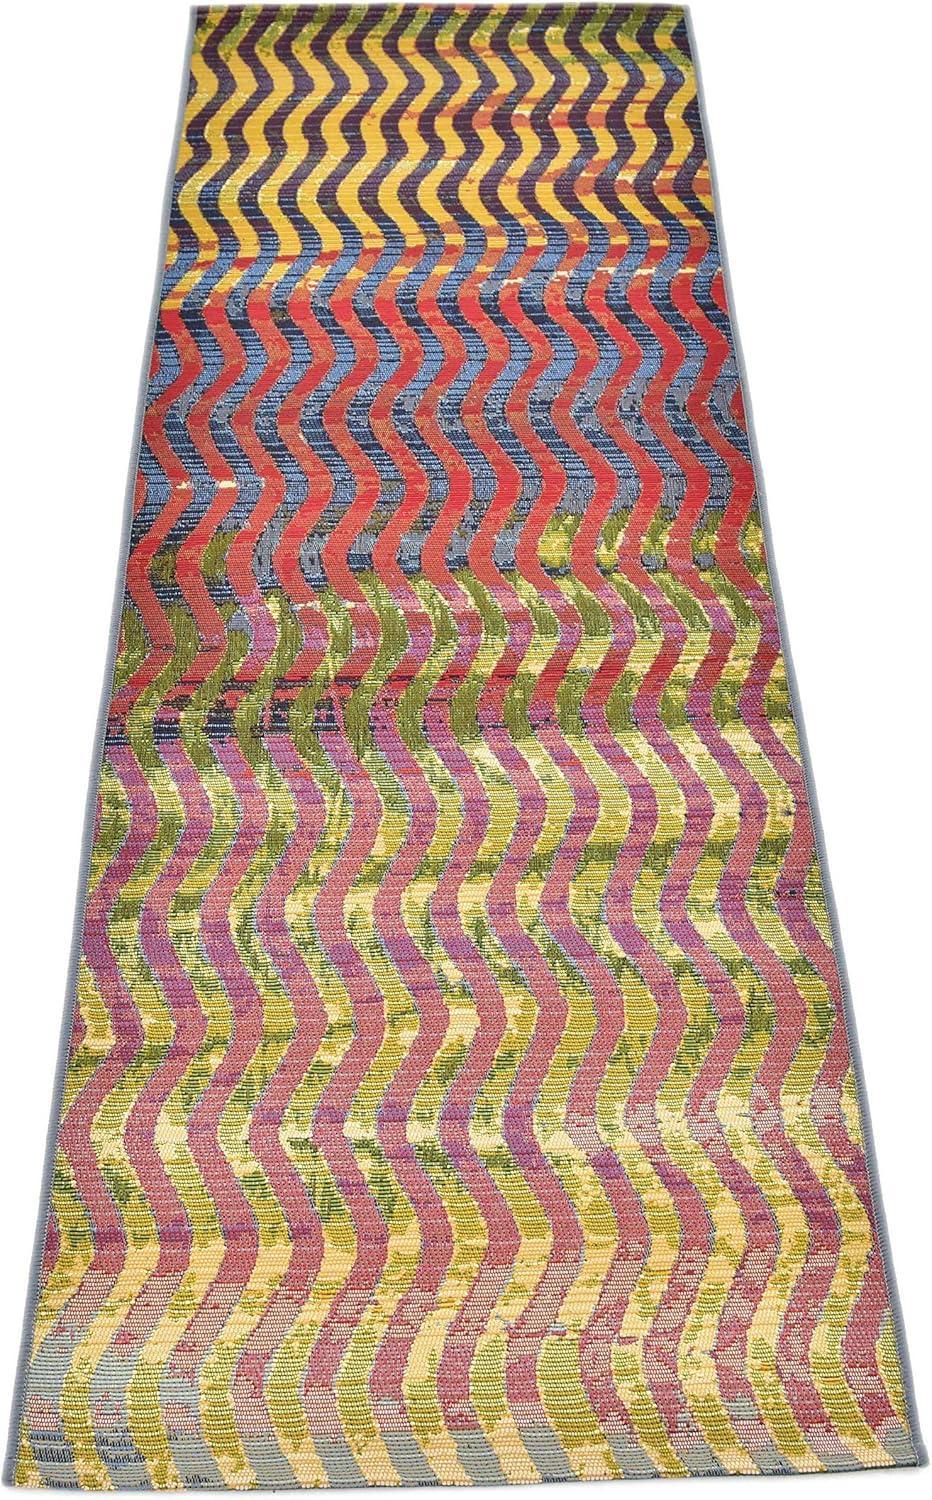 Vibrant Spectrum Stripe 2' x 6' Outdoor Runner Rug in Synthetic Multicolor